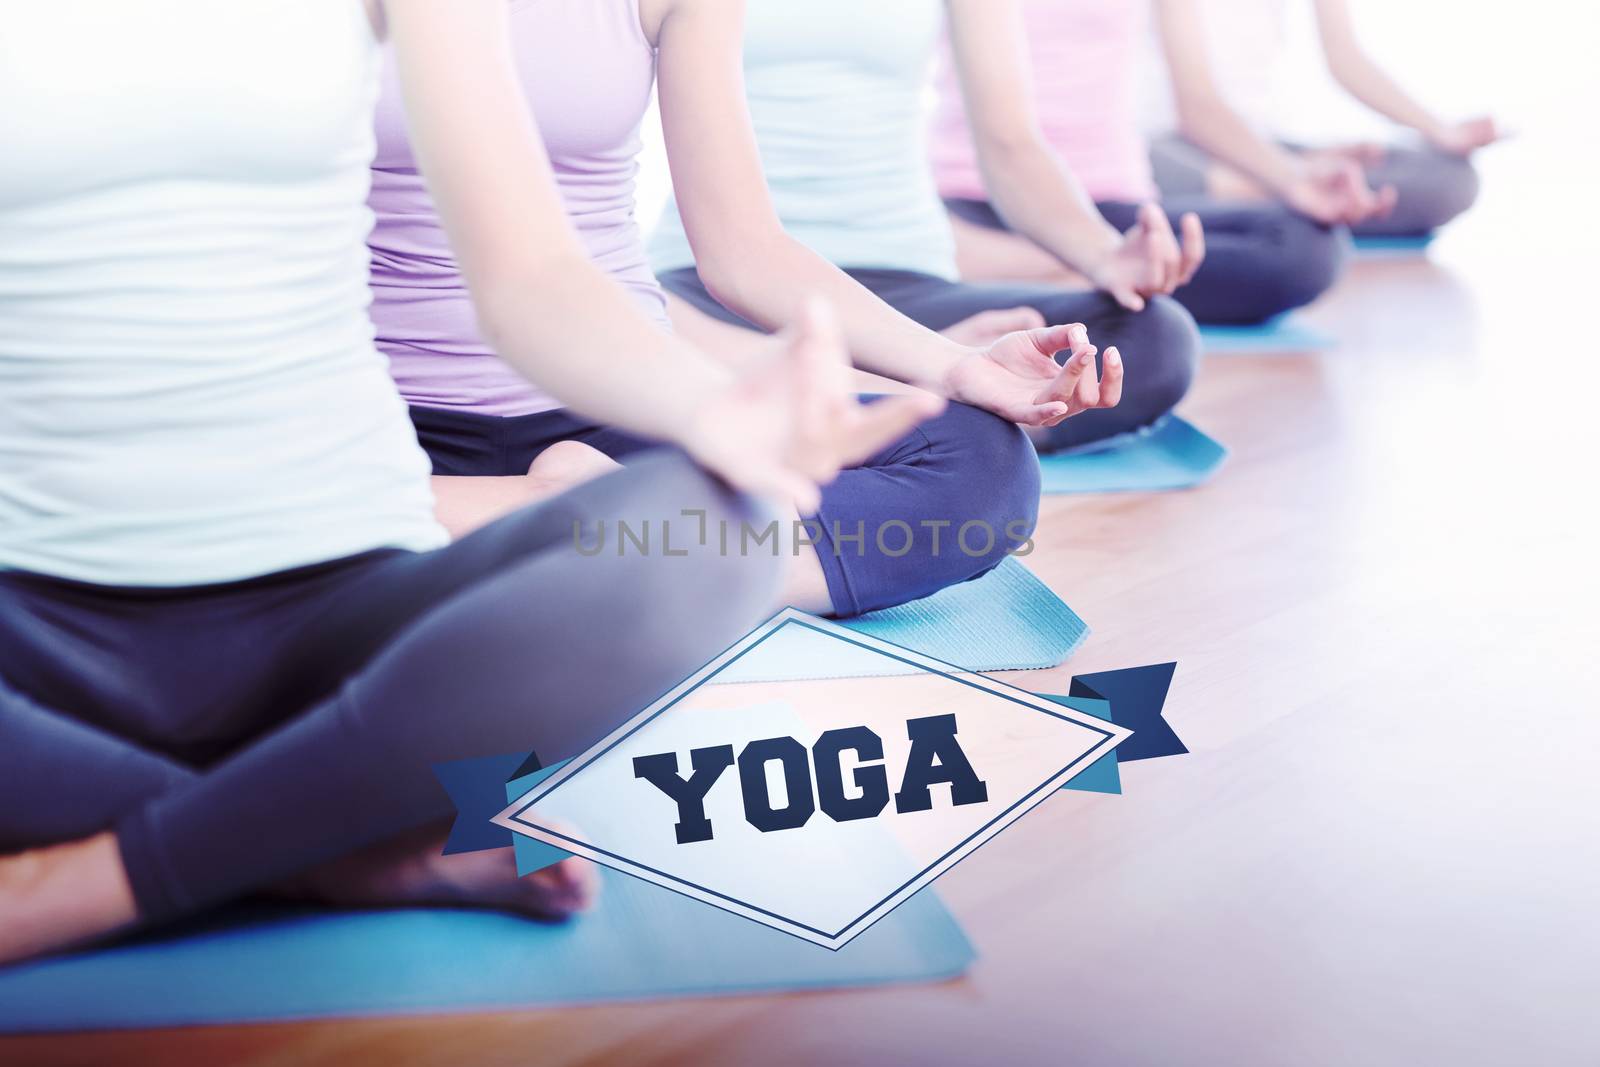 The word yoga and sporty women in lotus pose at fitness studio against badge